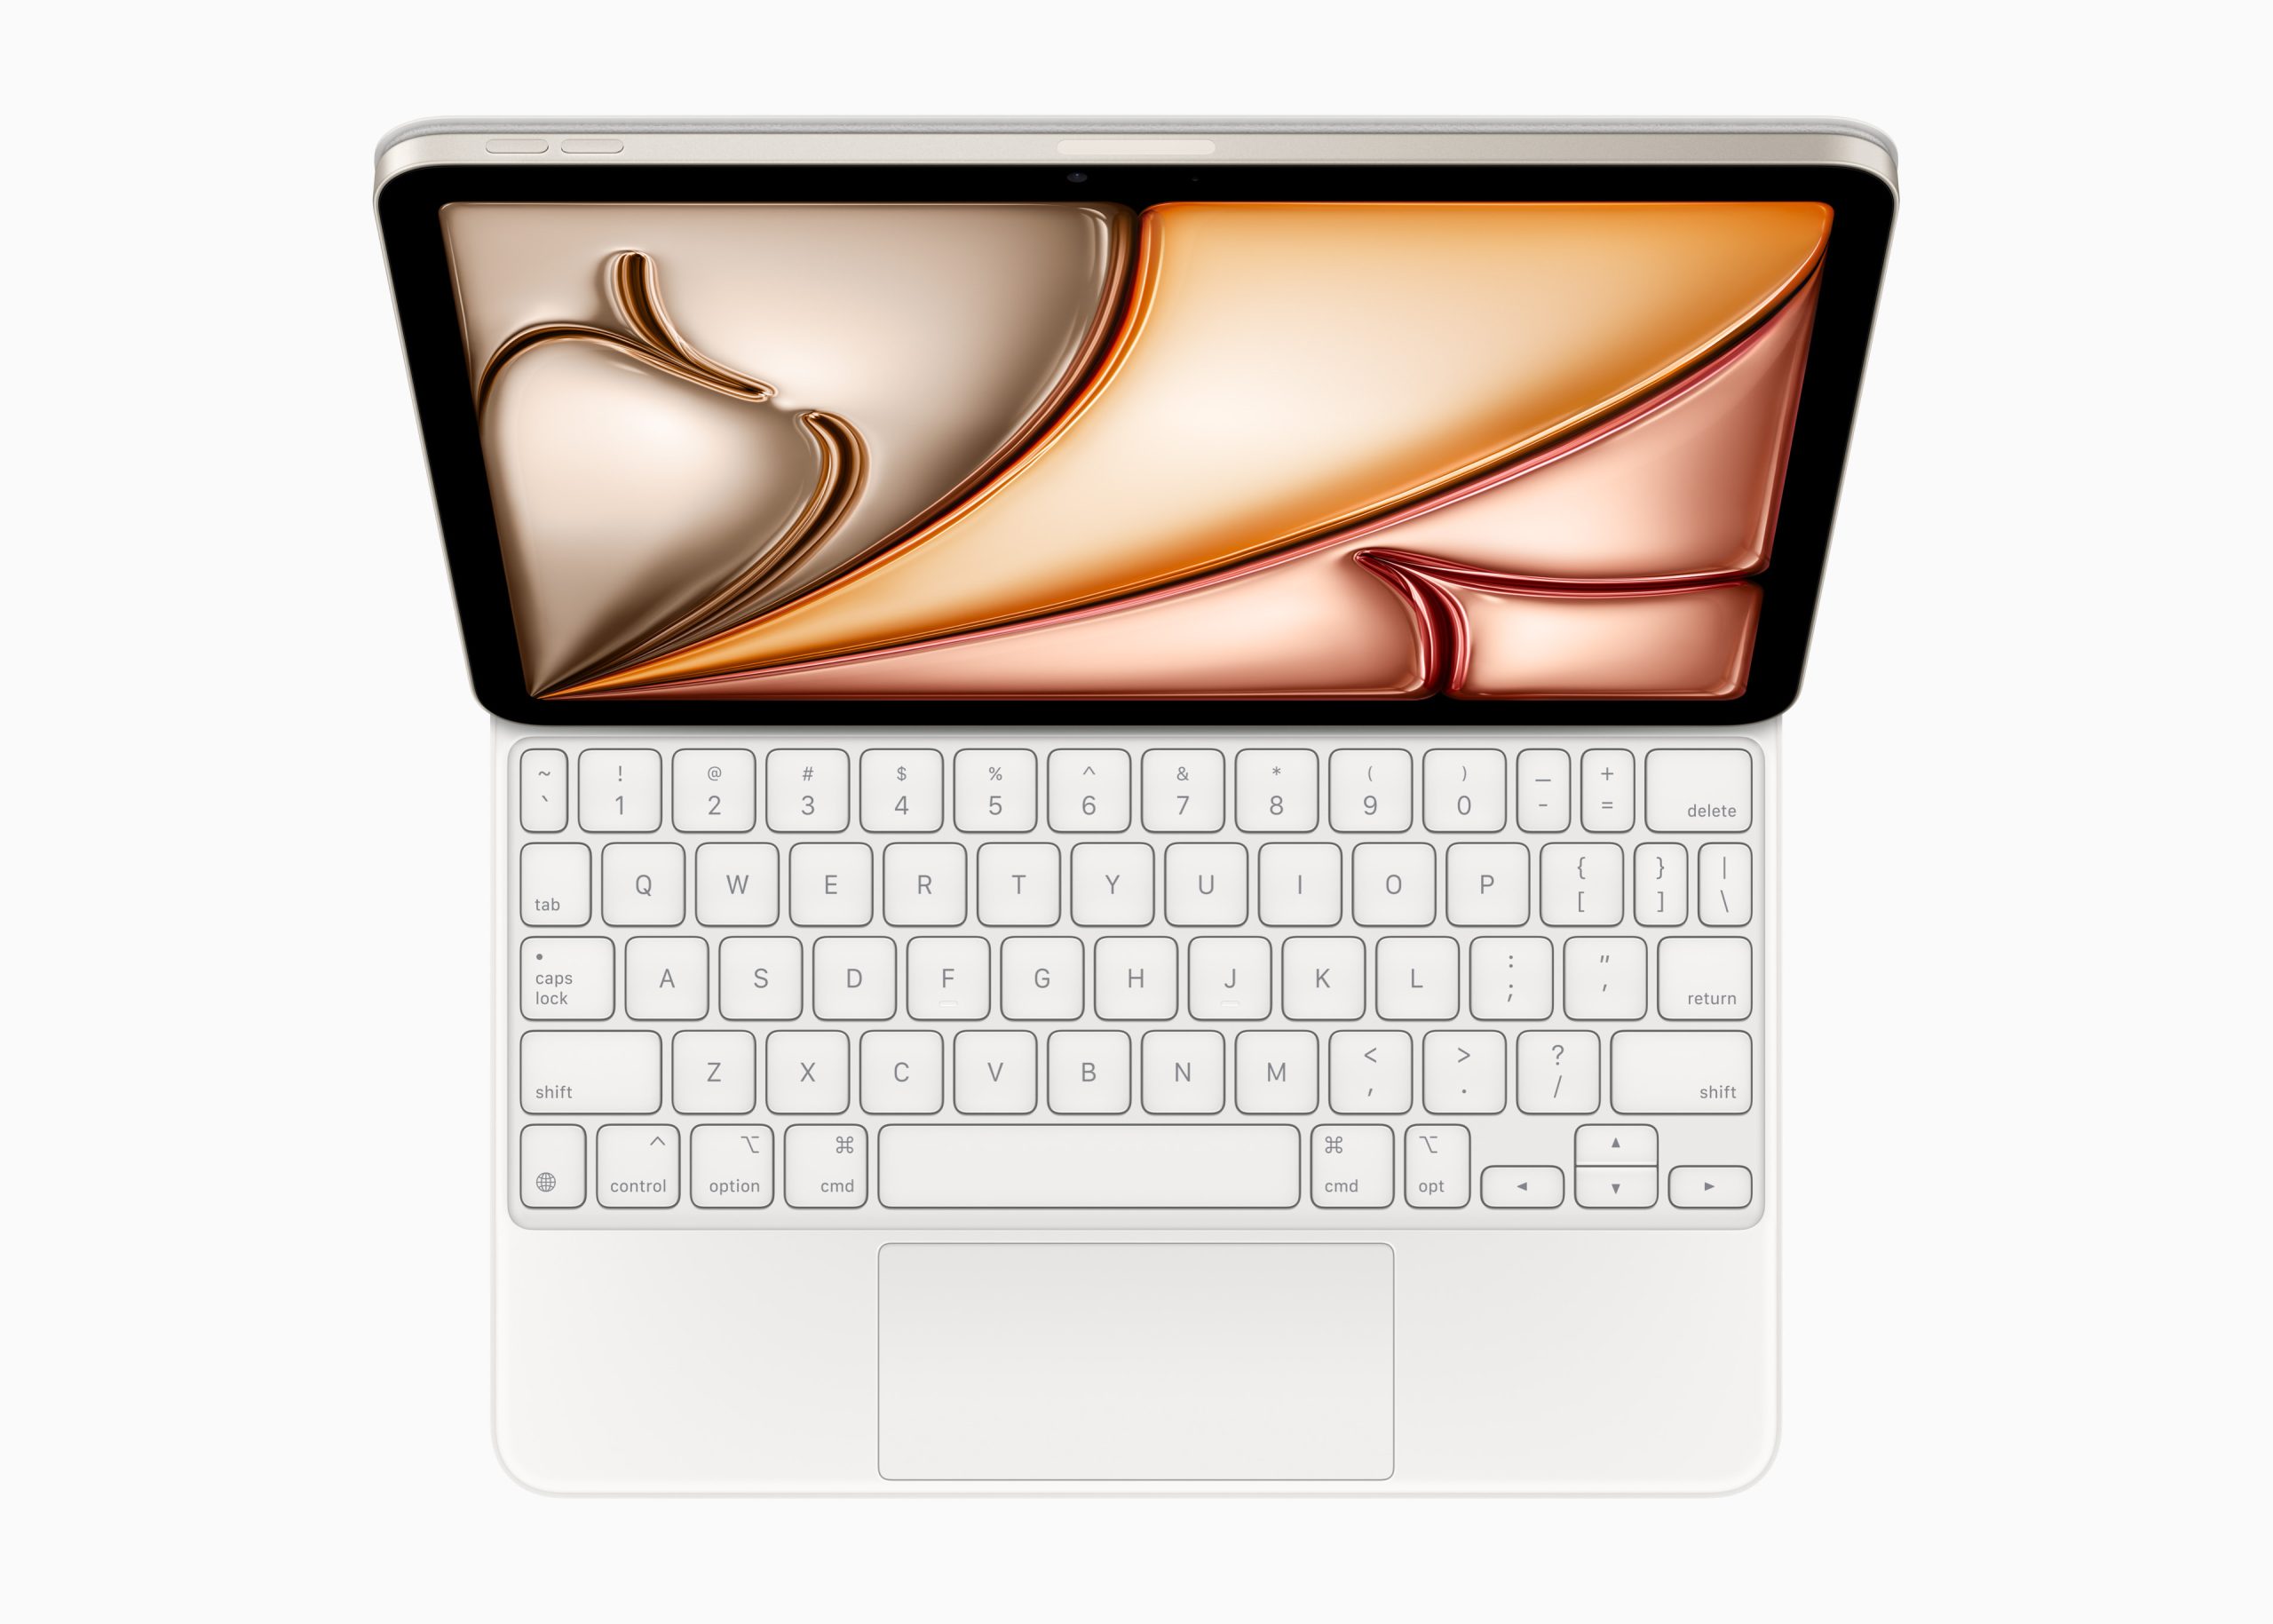 keyboard's sleek and minimalist design complements the iPad's aesthetic, while the enhanced trackpad